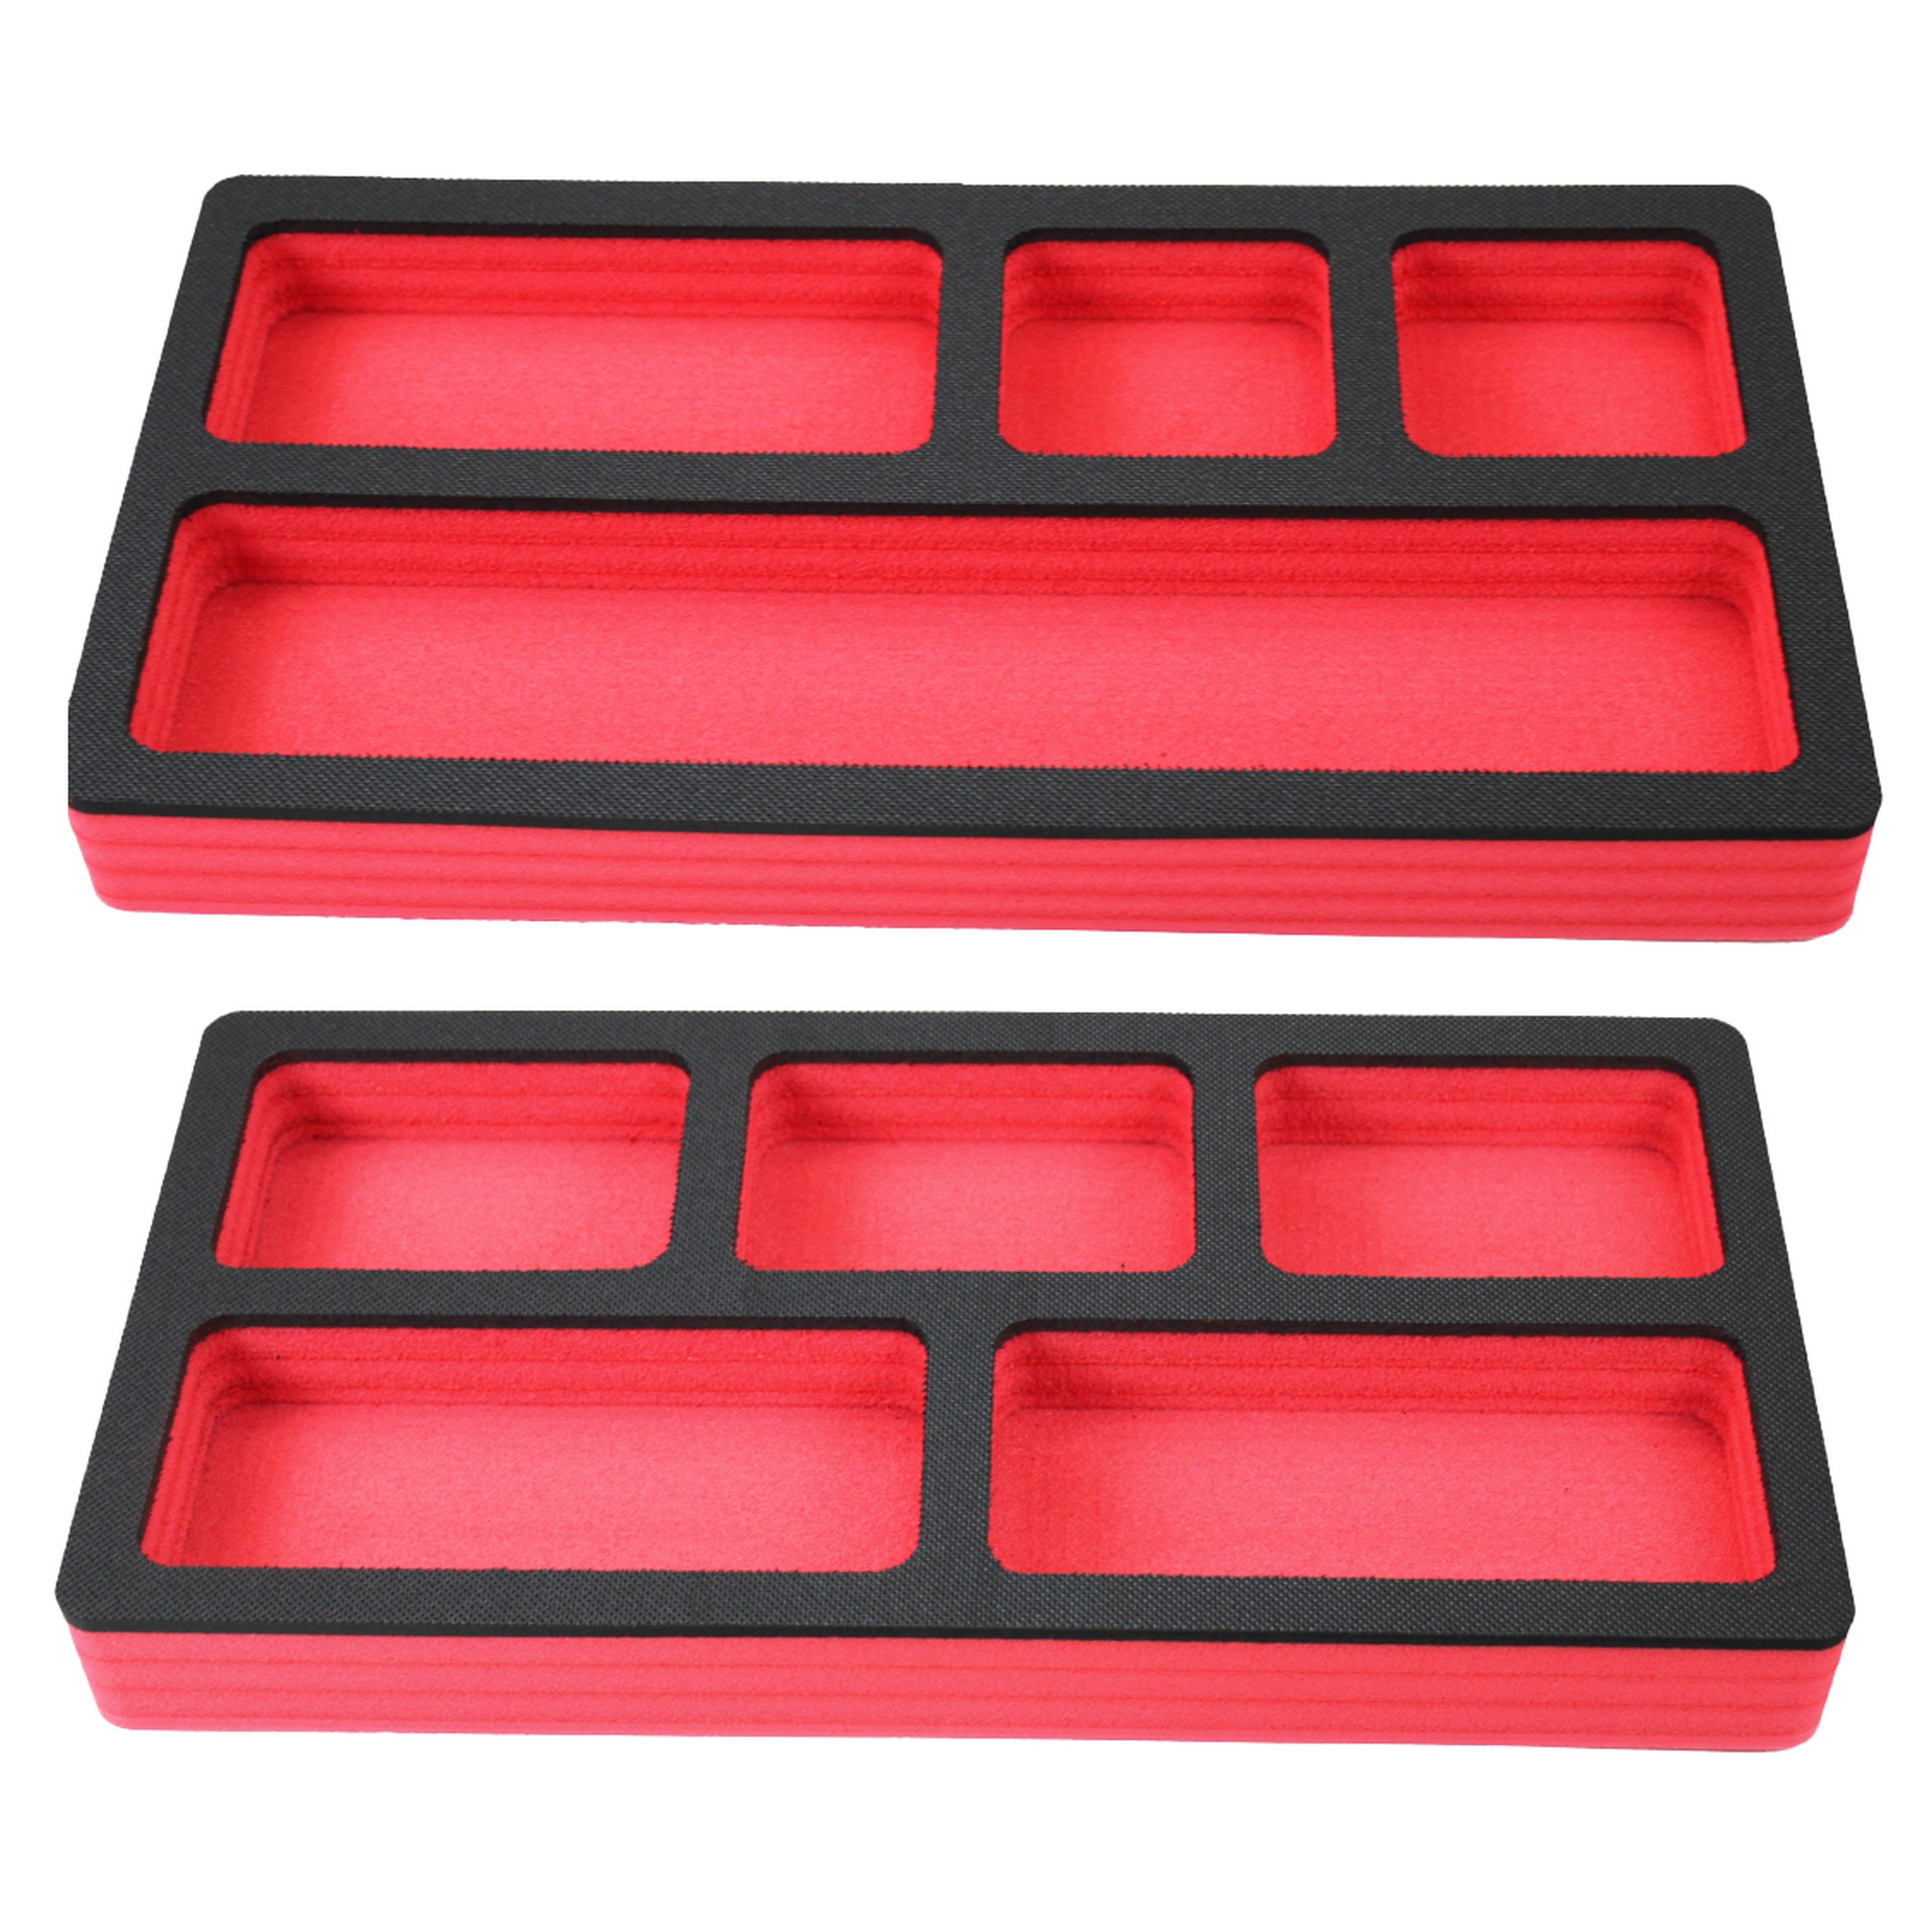 Tool Drawer Organizer 2-Piece Insert Set Red and Black Durable Foam Non-Slip Anti-Rattle Bin Holder Tray 20 x 10 Inch Large Pockets Fits Craftsman Husky Kobalt Milwaukee and Many Others